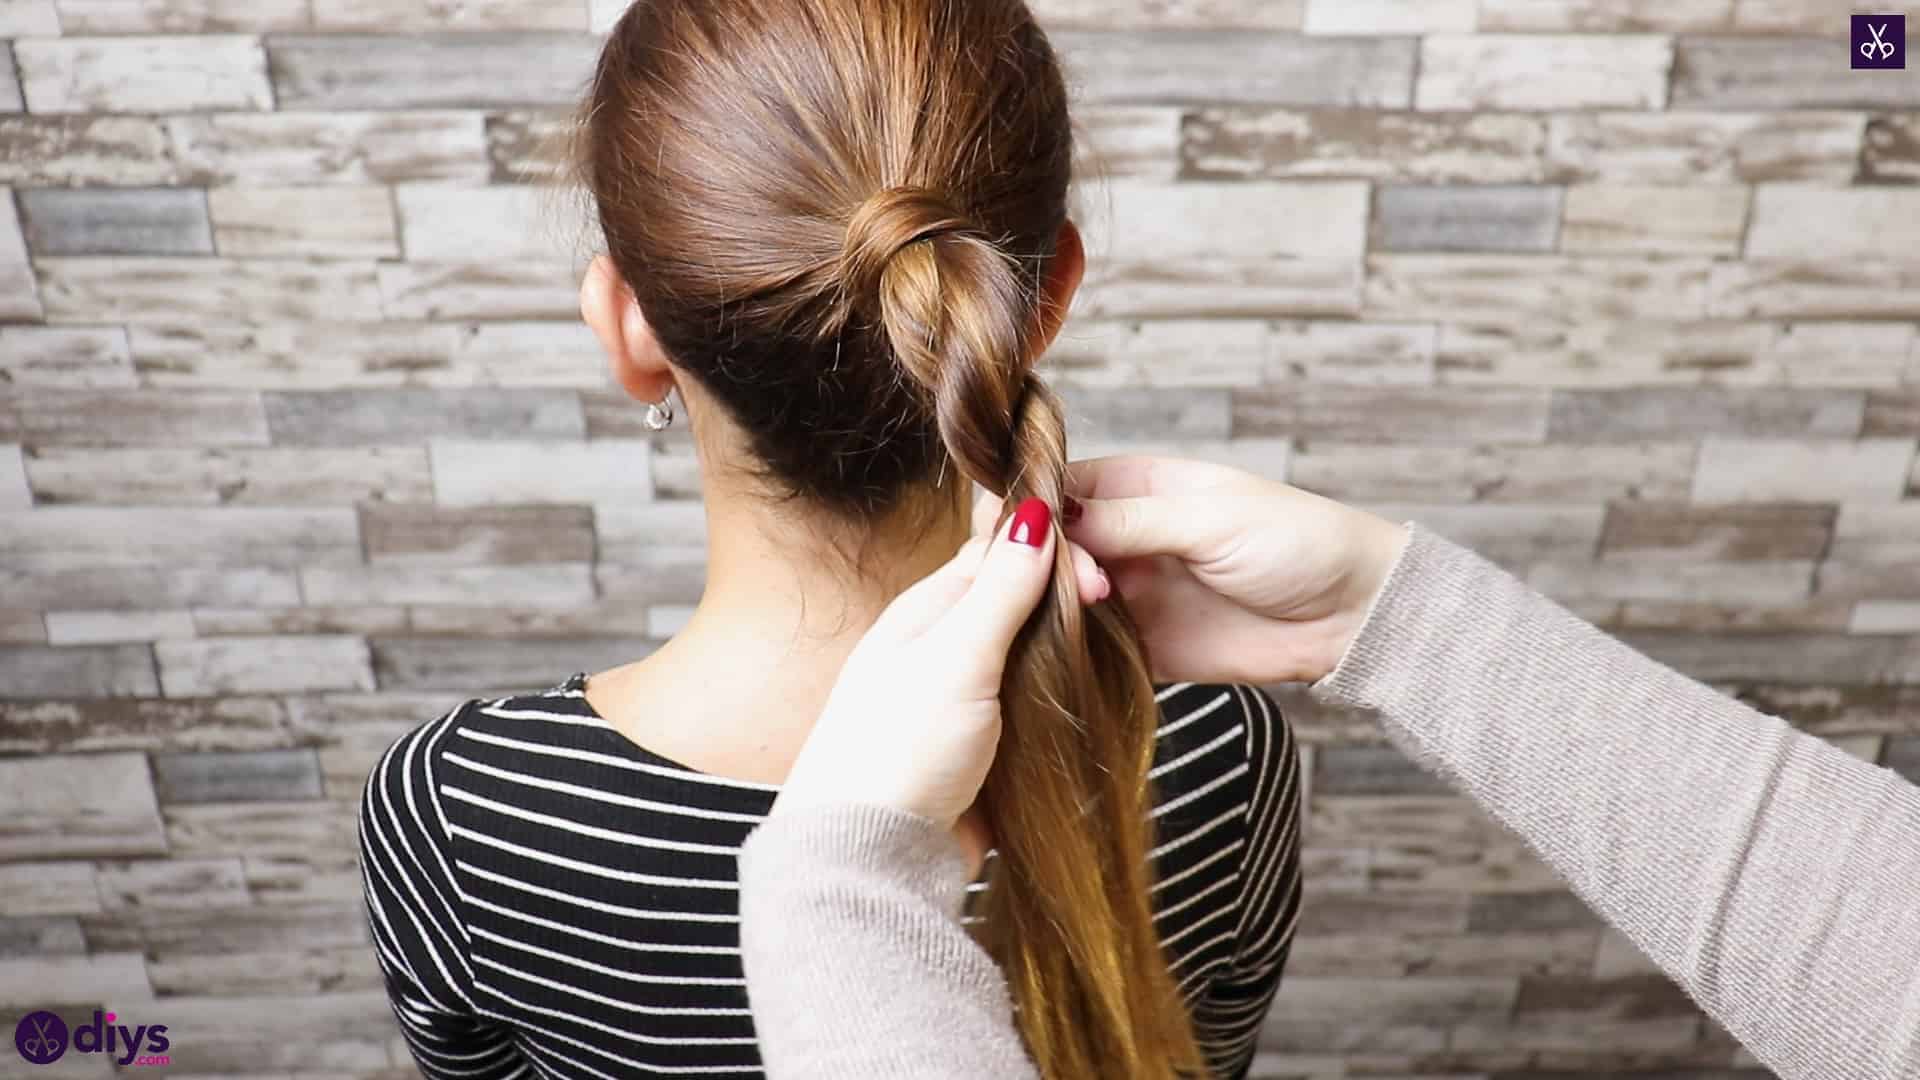 12 Hottest Extension Ponytail Hairstyles - How to Easily Style